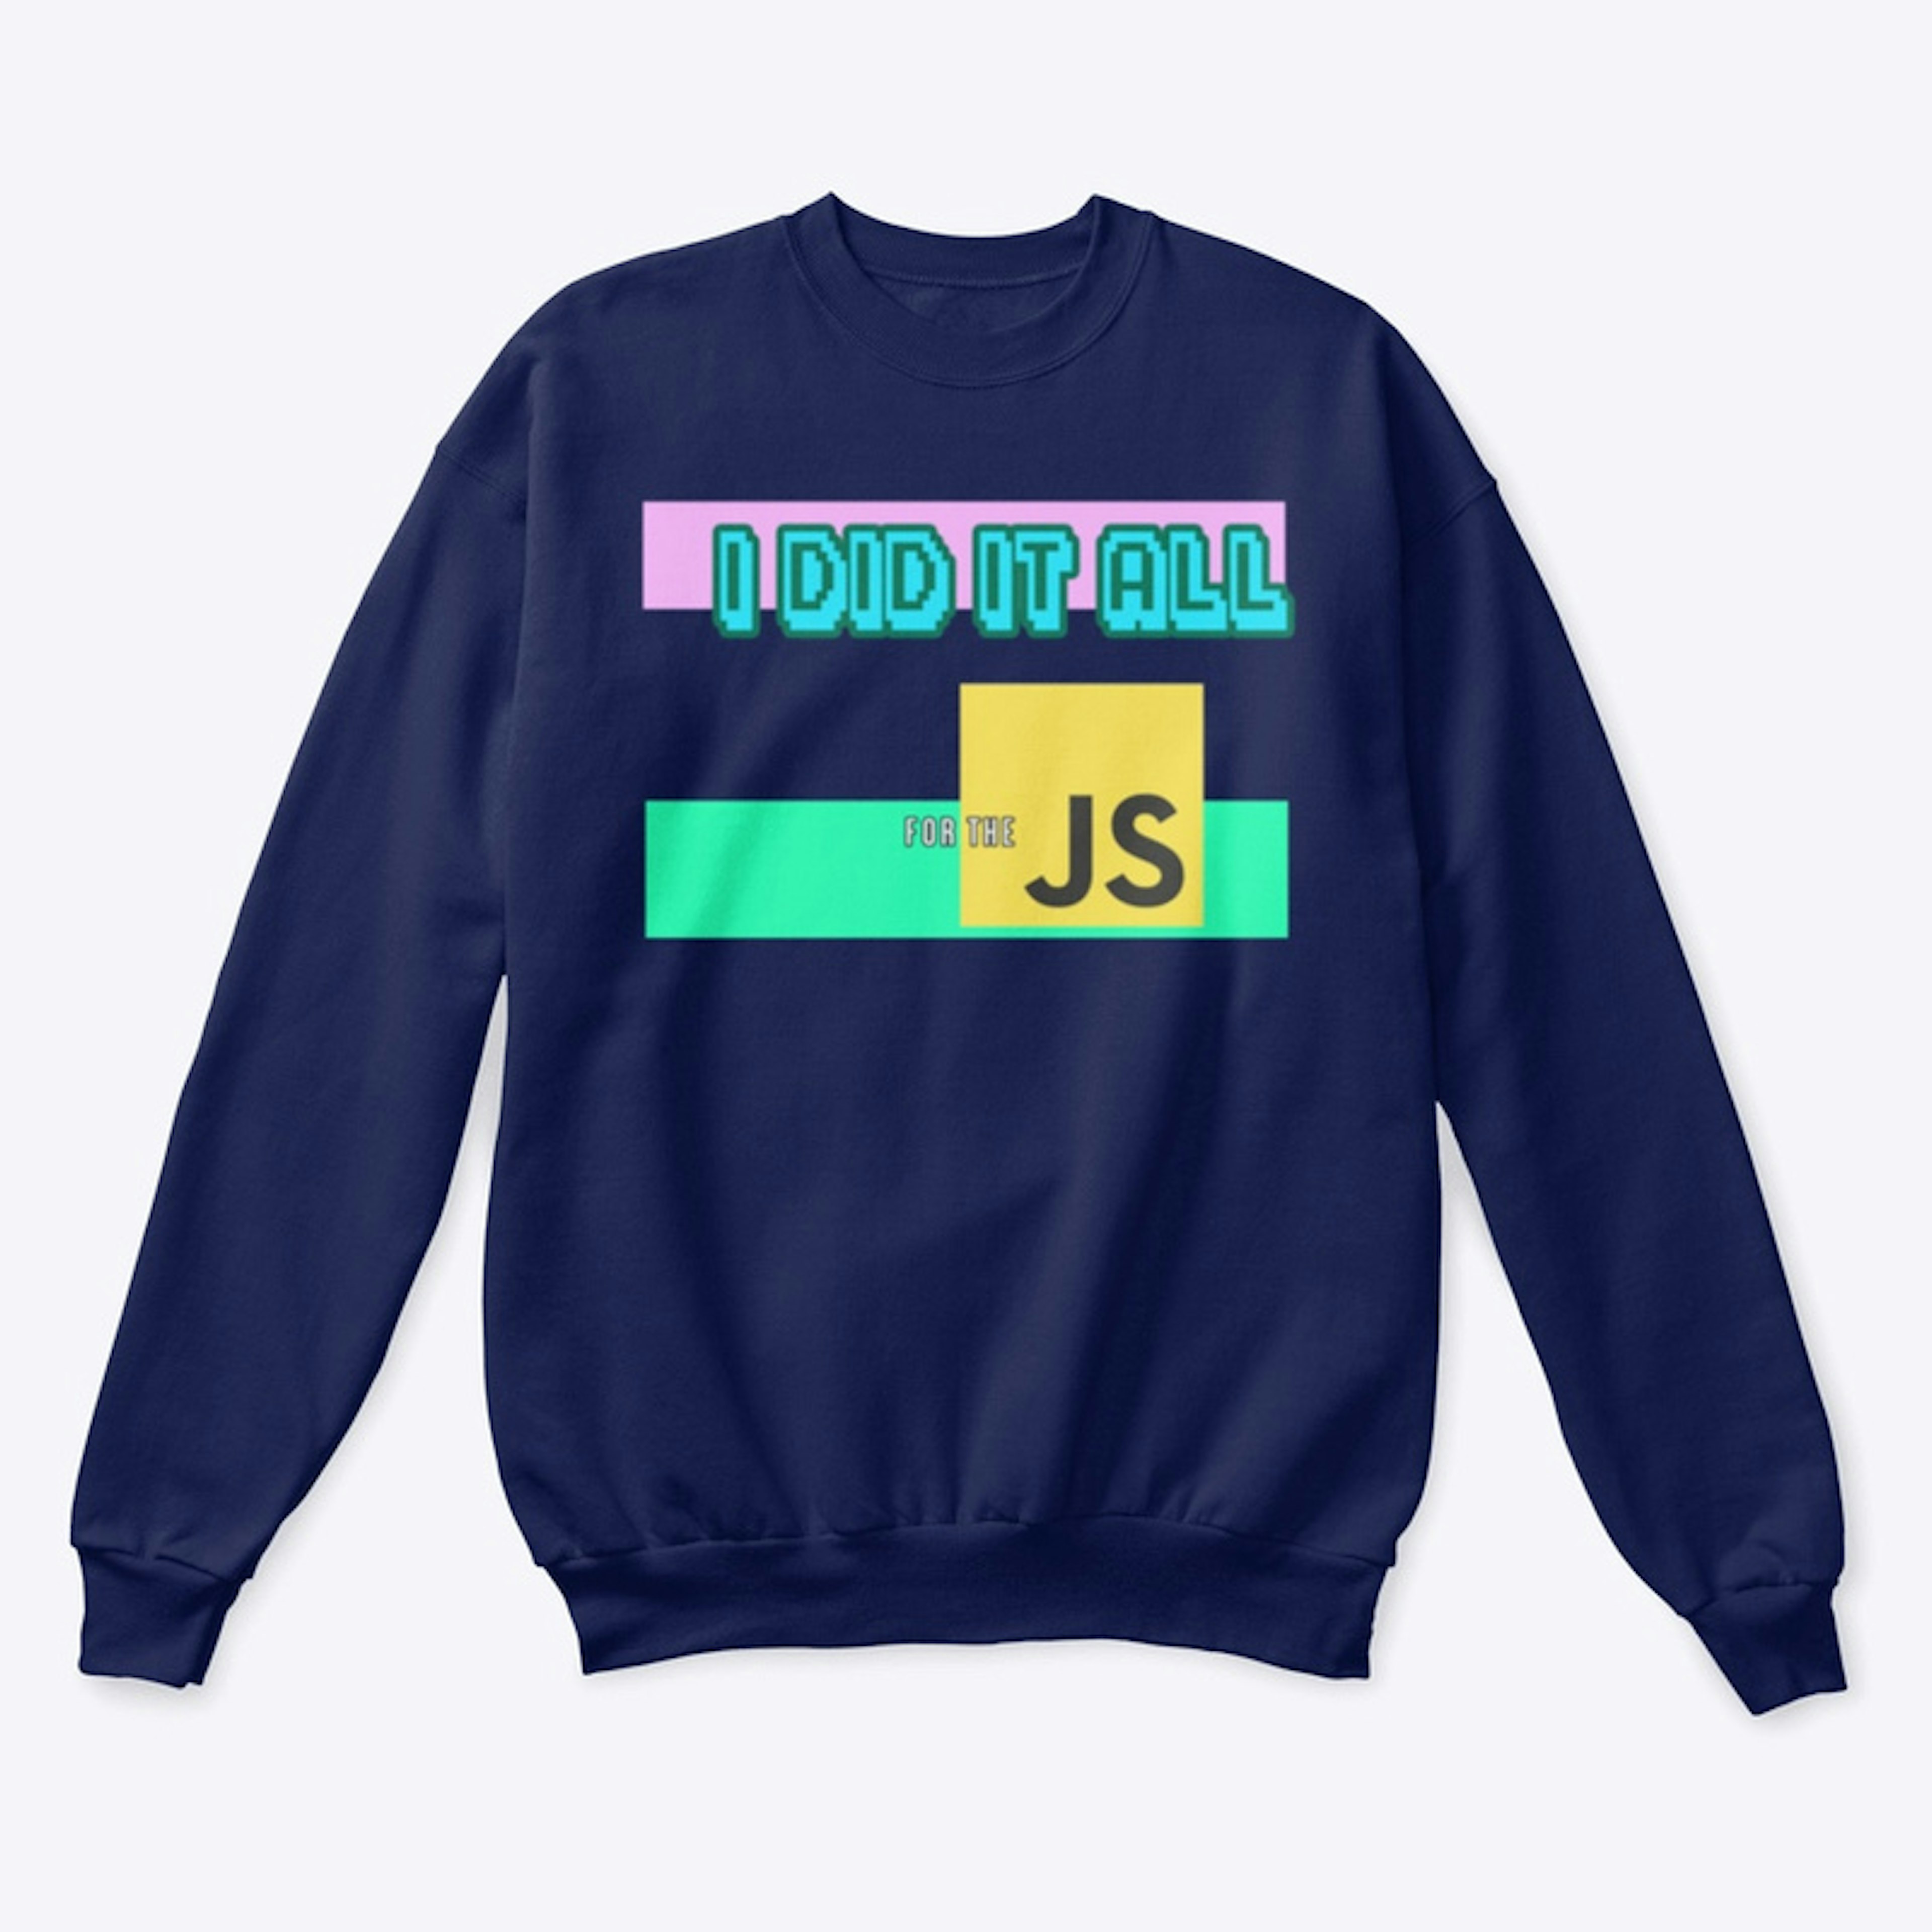 I did it all for the JavaScript